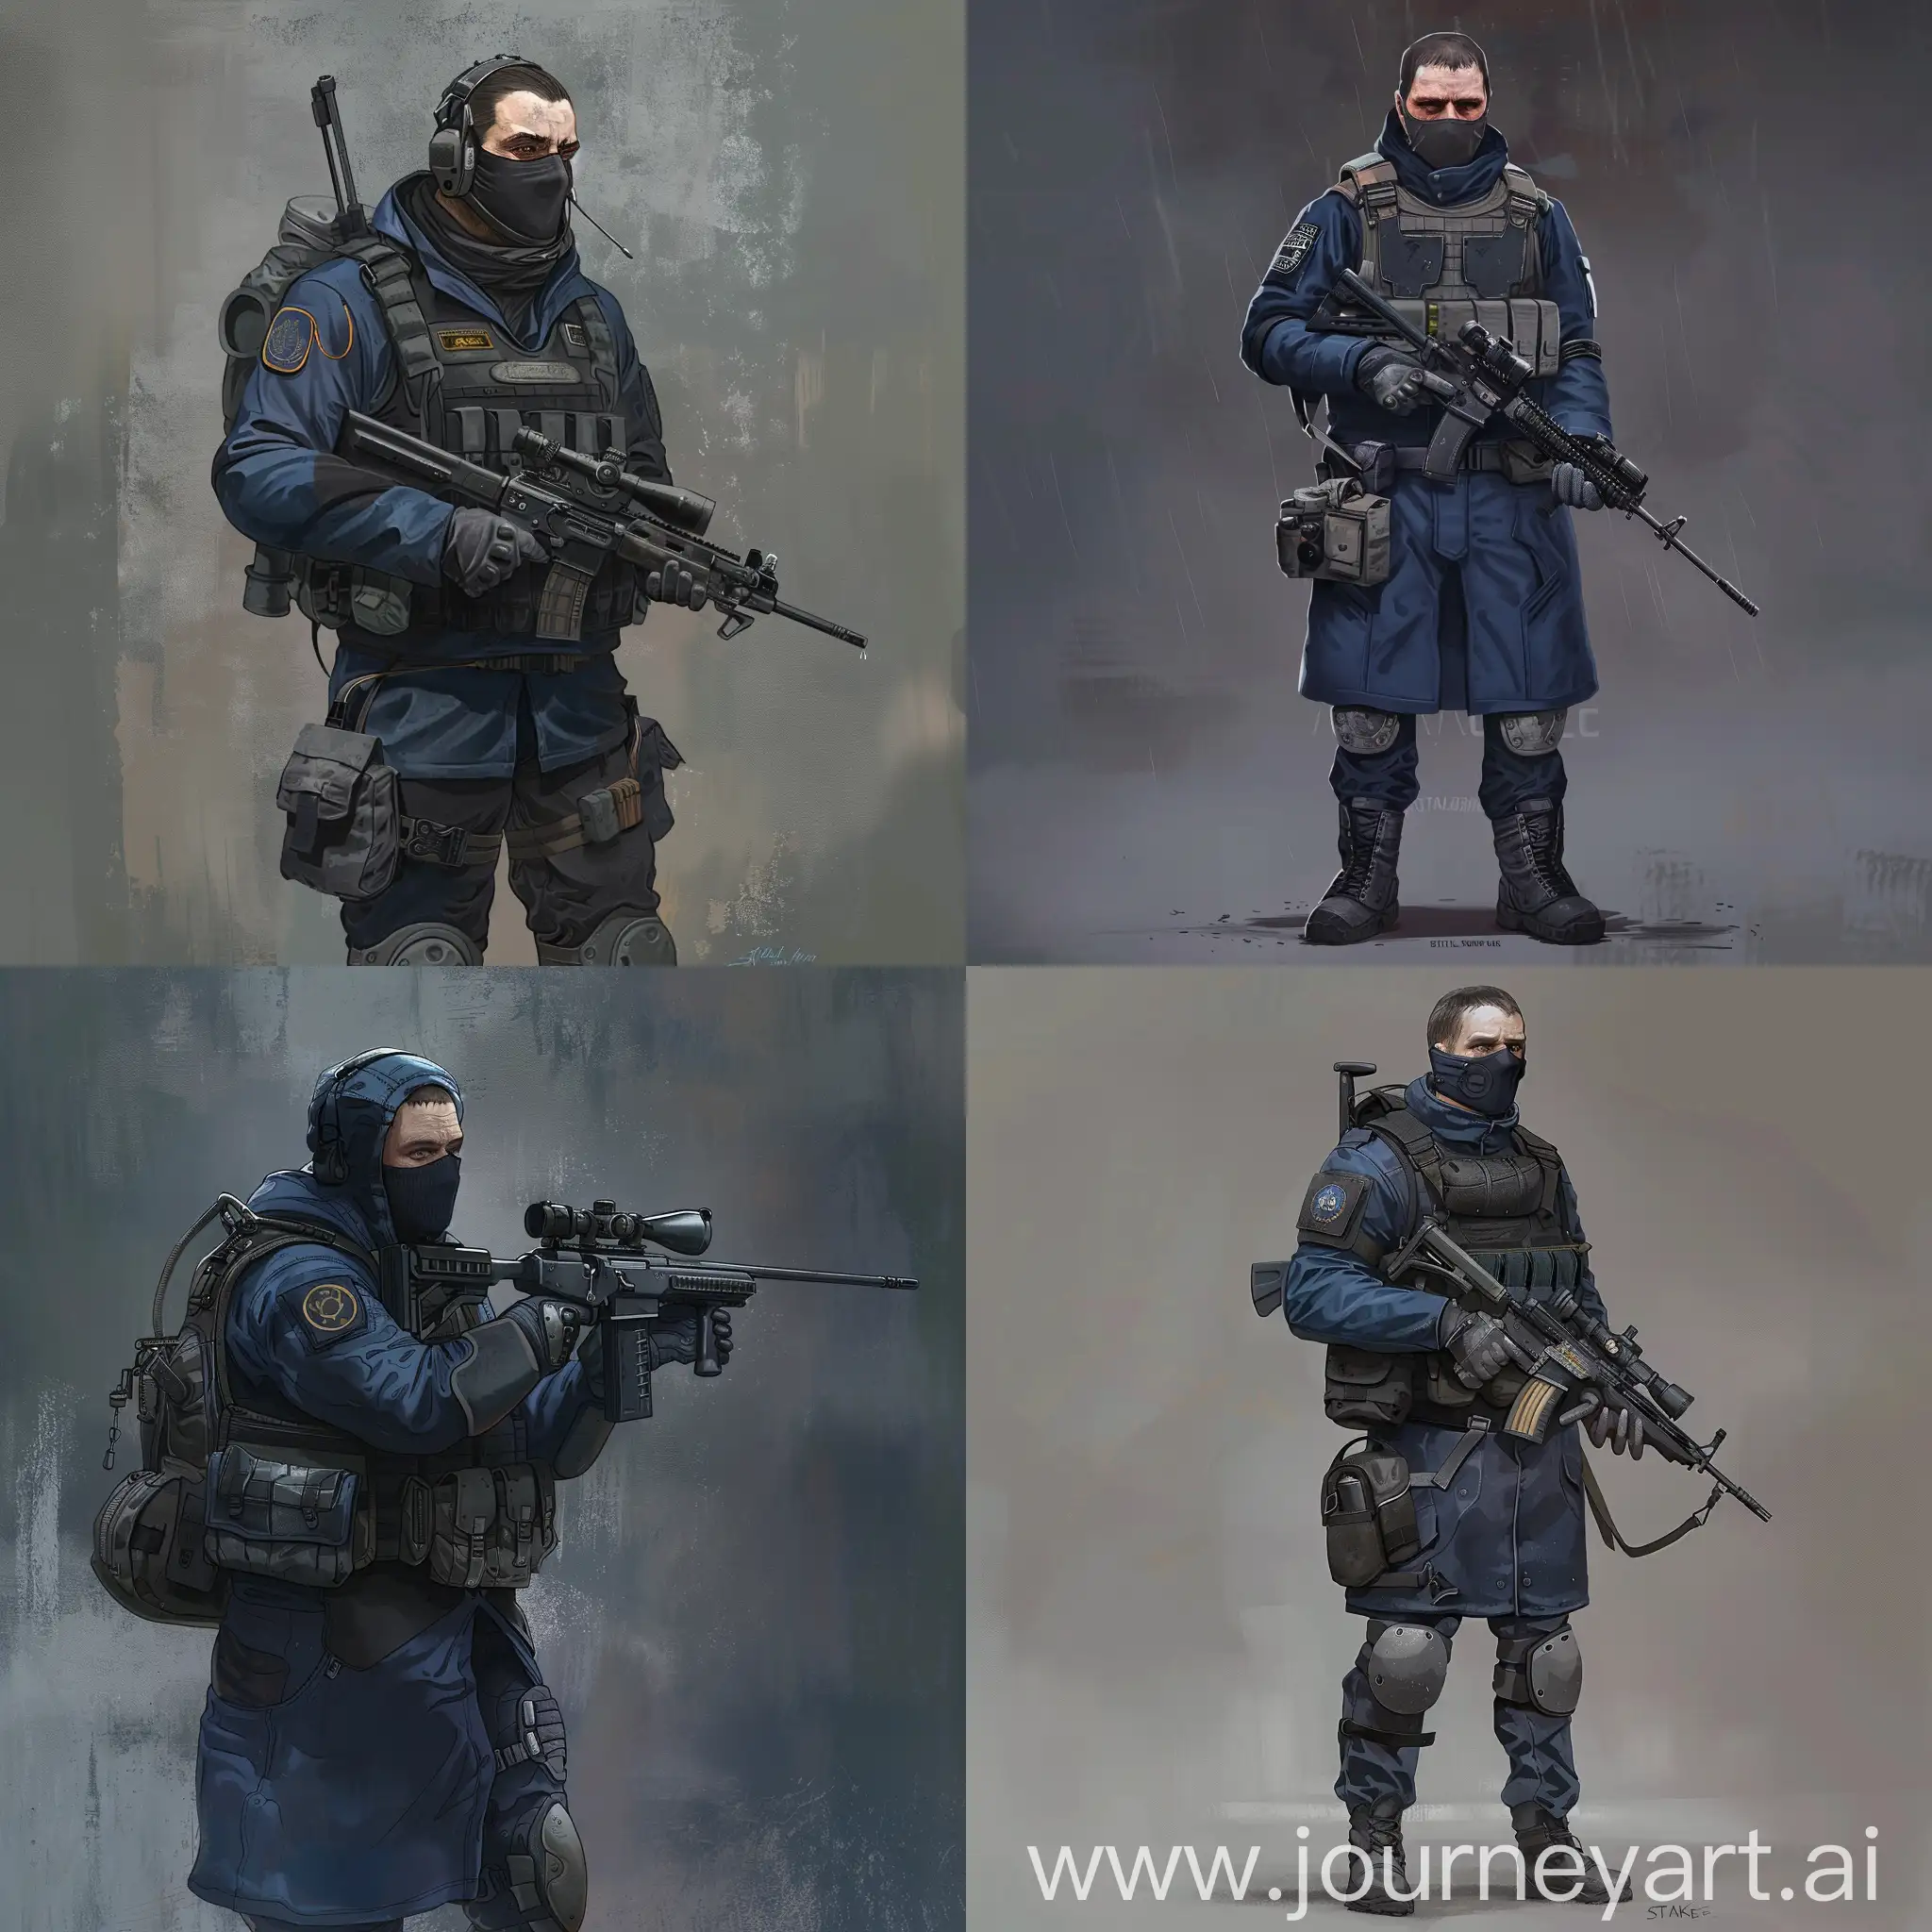 Concept art a mercenary from the universe of S.T.A.L.K.E.R., a mercenary dressed in a dark blue military raincoat, gray military armor on his body, a dark mask on his face, a small military backpack on his back, sniper rifle in his hands.